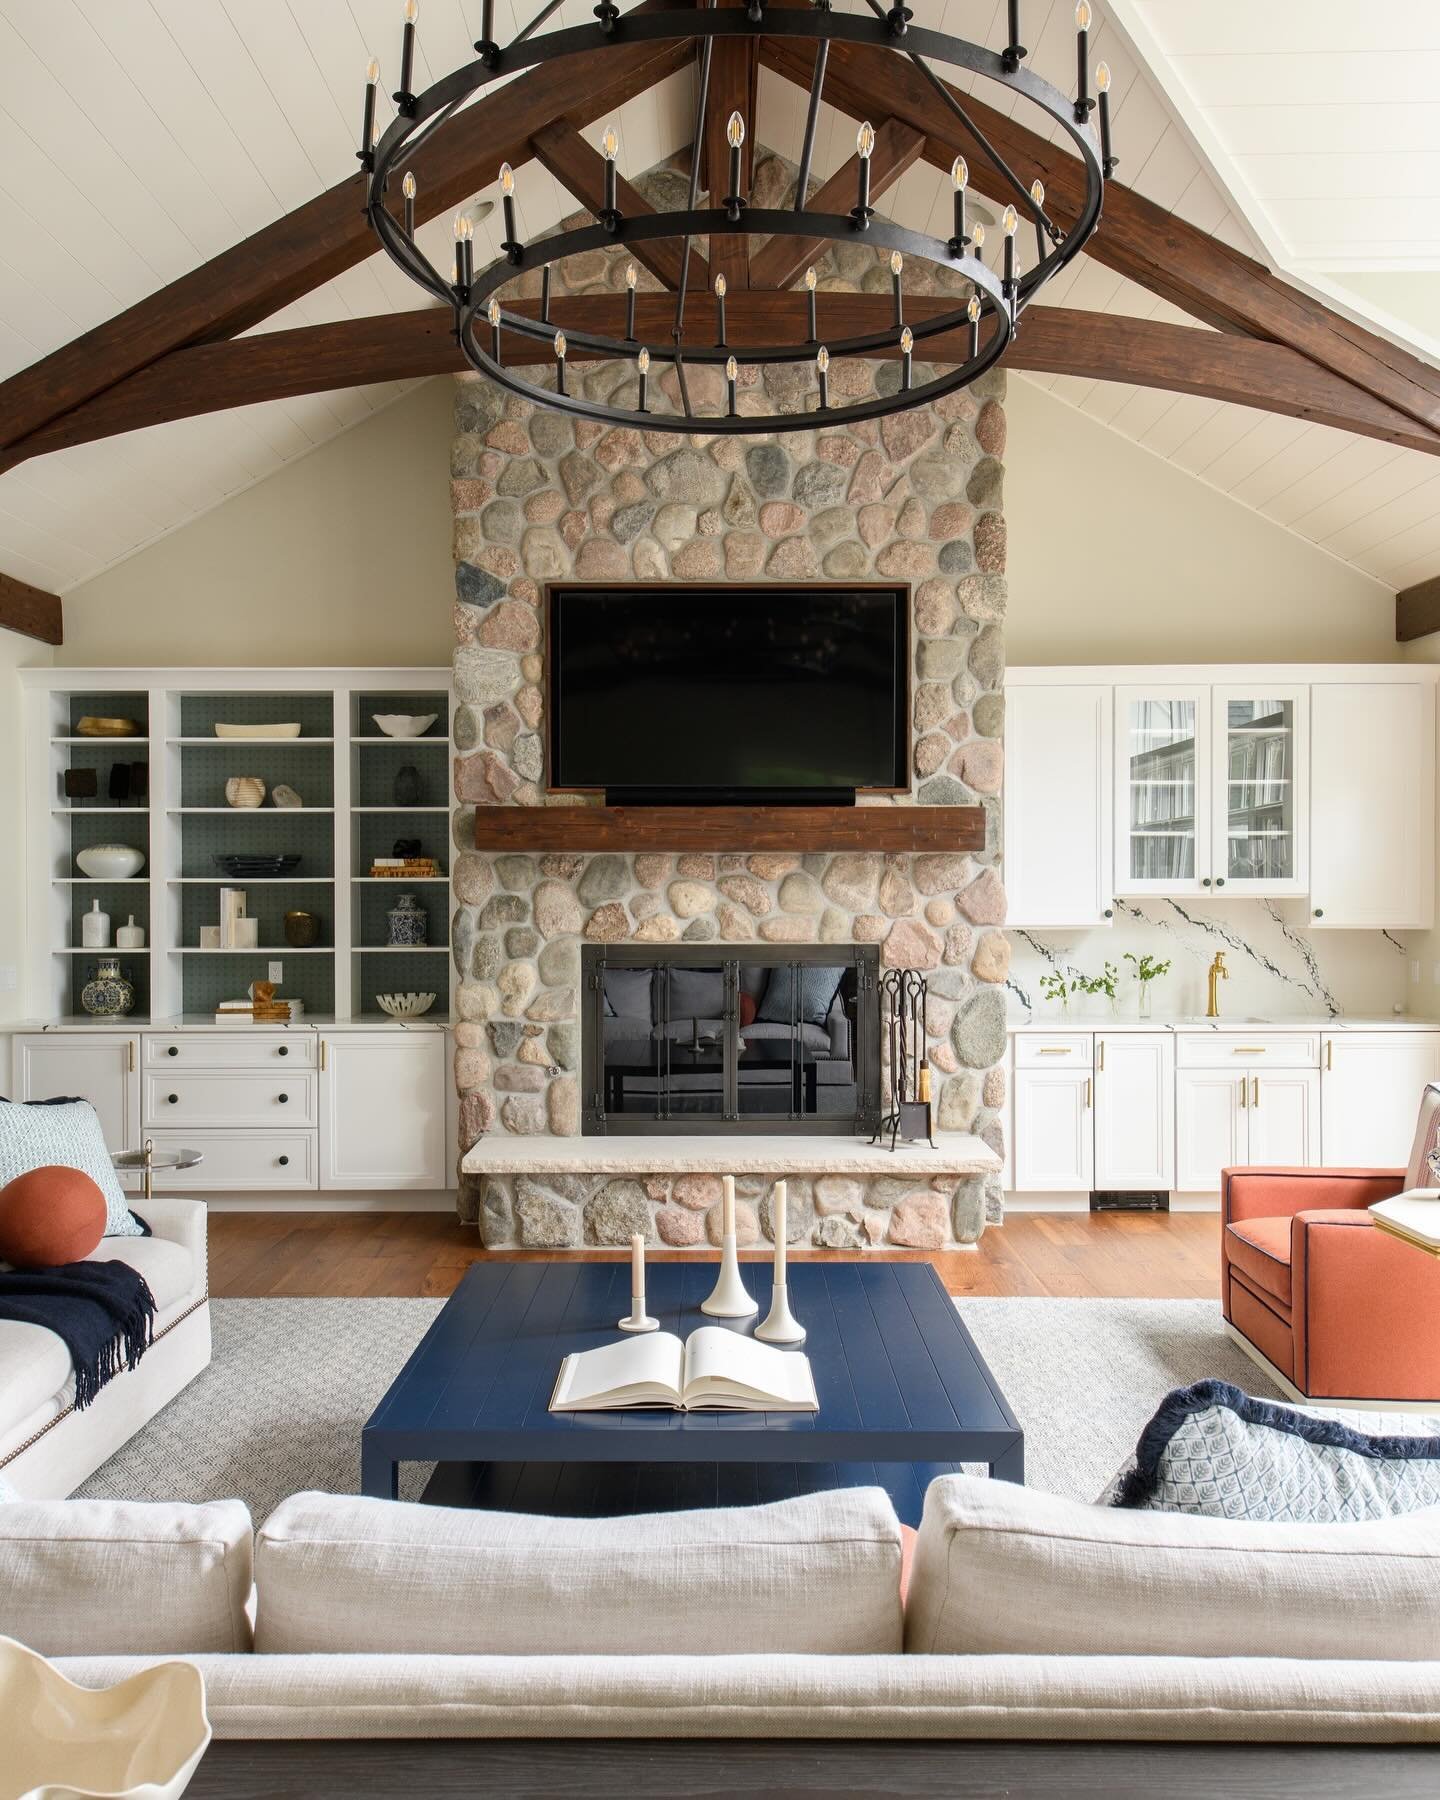 Rustic elegance meets colorful style in this lake house great room. Our client loves bold color and we enjoyed incorporating it into their home. 

In this spacious great room, you&rsquo;ll notice how the deep blue coffee table, coral upholstered chai